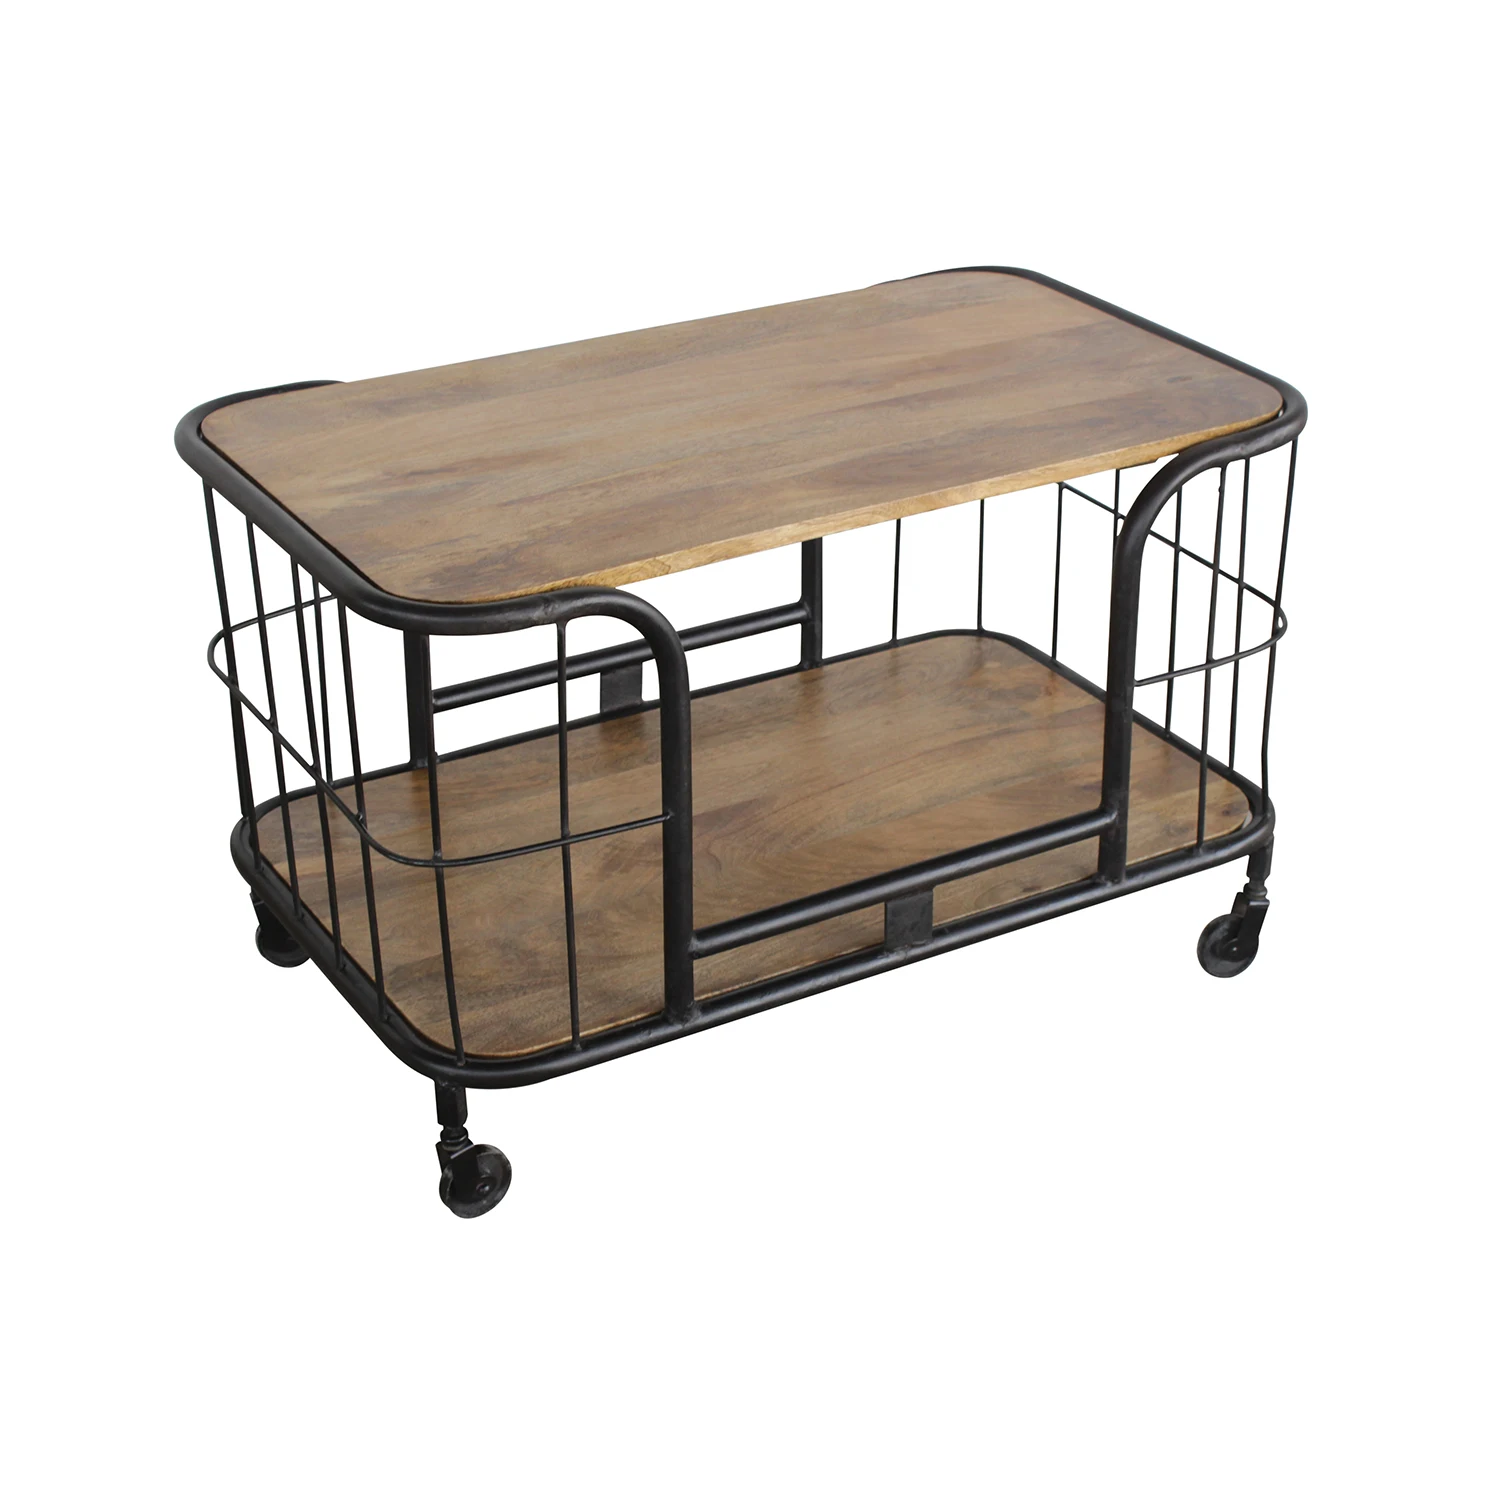 Industrial Cart Coffee Table With 2 Shelf Bakers Shelf Multifunctional Metal Wood Center Table Coffee Table For Living Room Buy Hammered Metal Coffee Table Living Room Wood Coffee Tables With Wheels